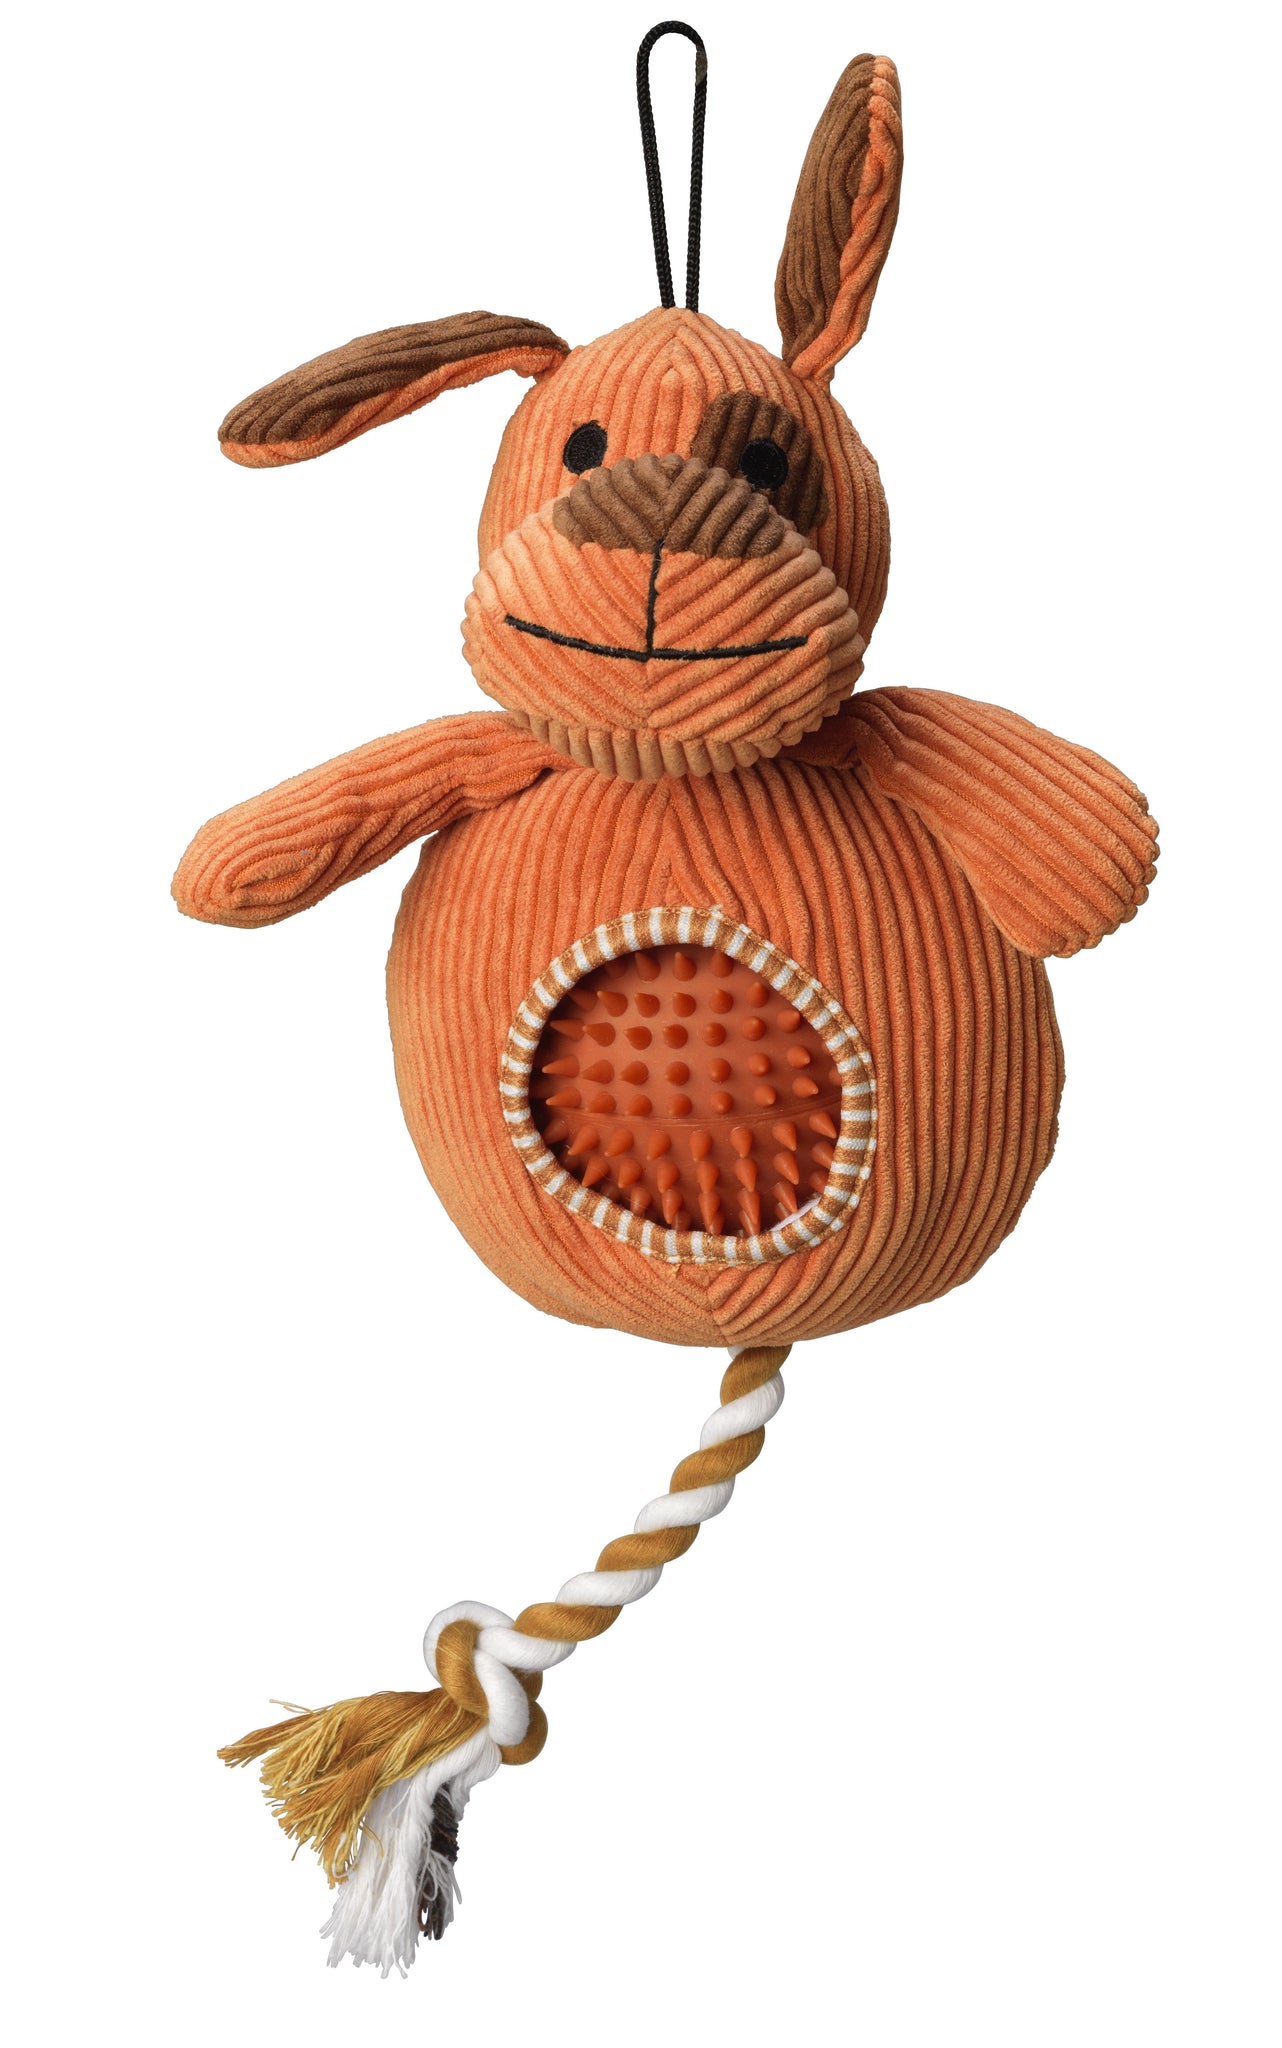 Dog Cord Toy With Spiky Ball